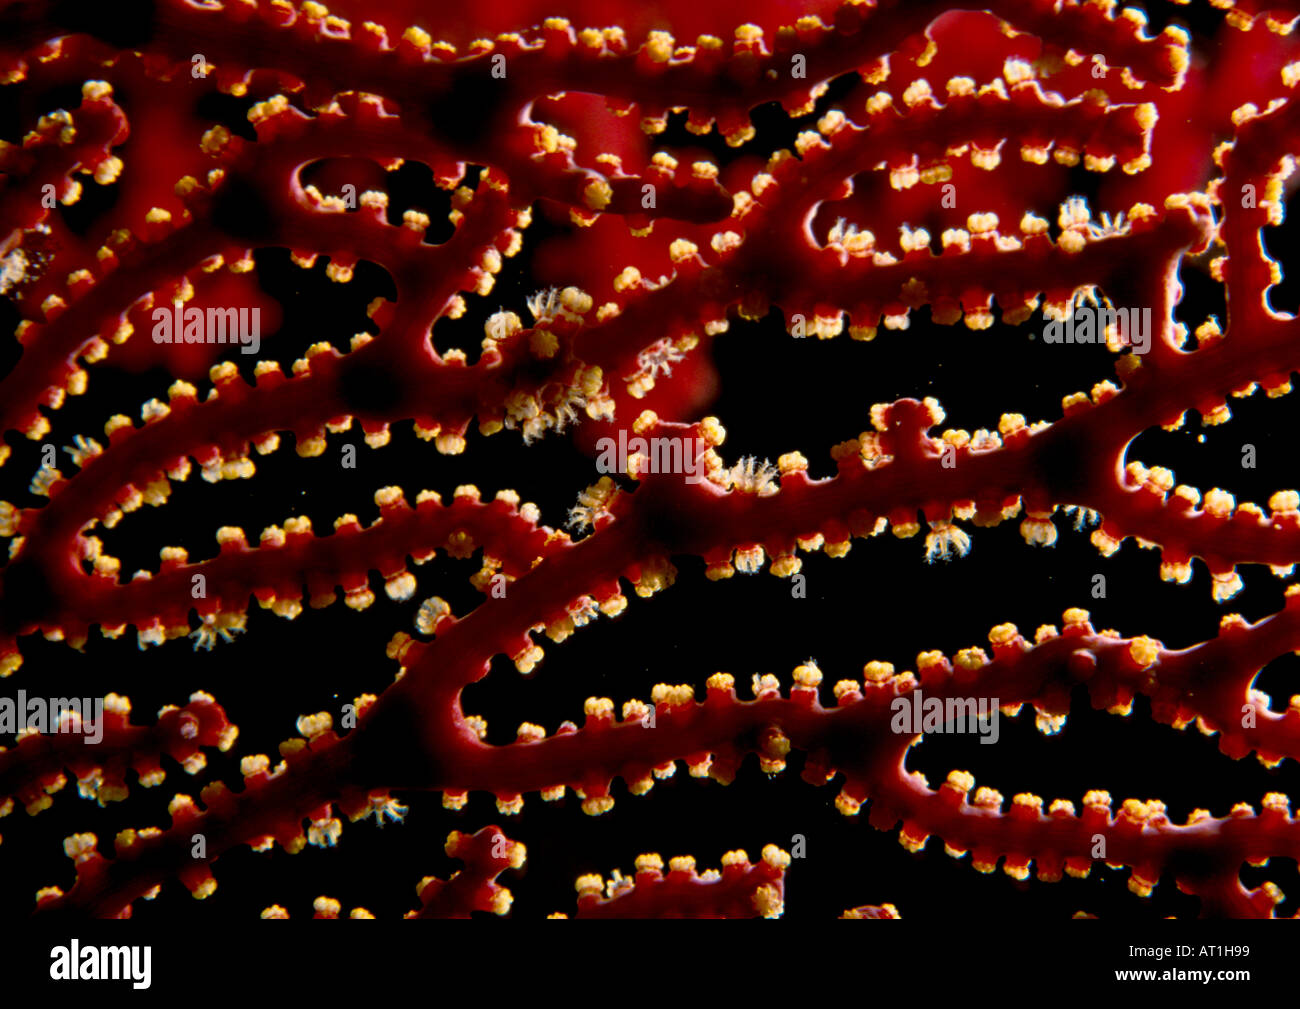 Acabaria splendens Knotted Fan Coral Faan Coral Octocorals Gorgonian Red sea Indian Ocean Egypt Stock Photo